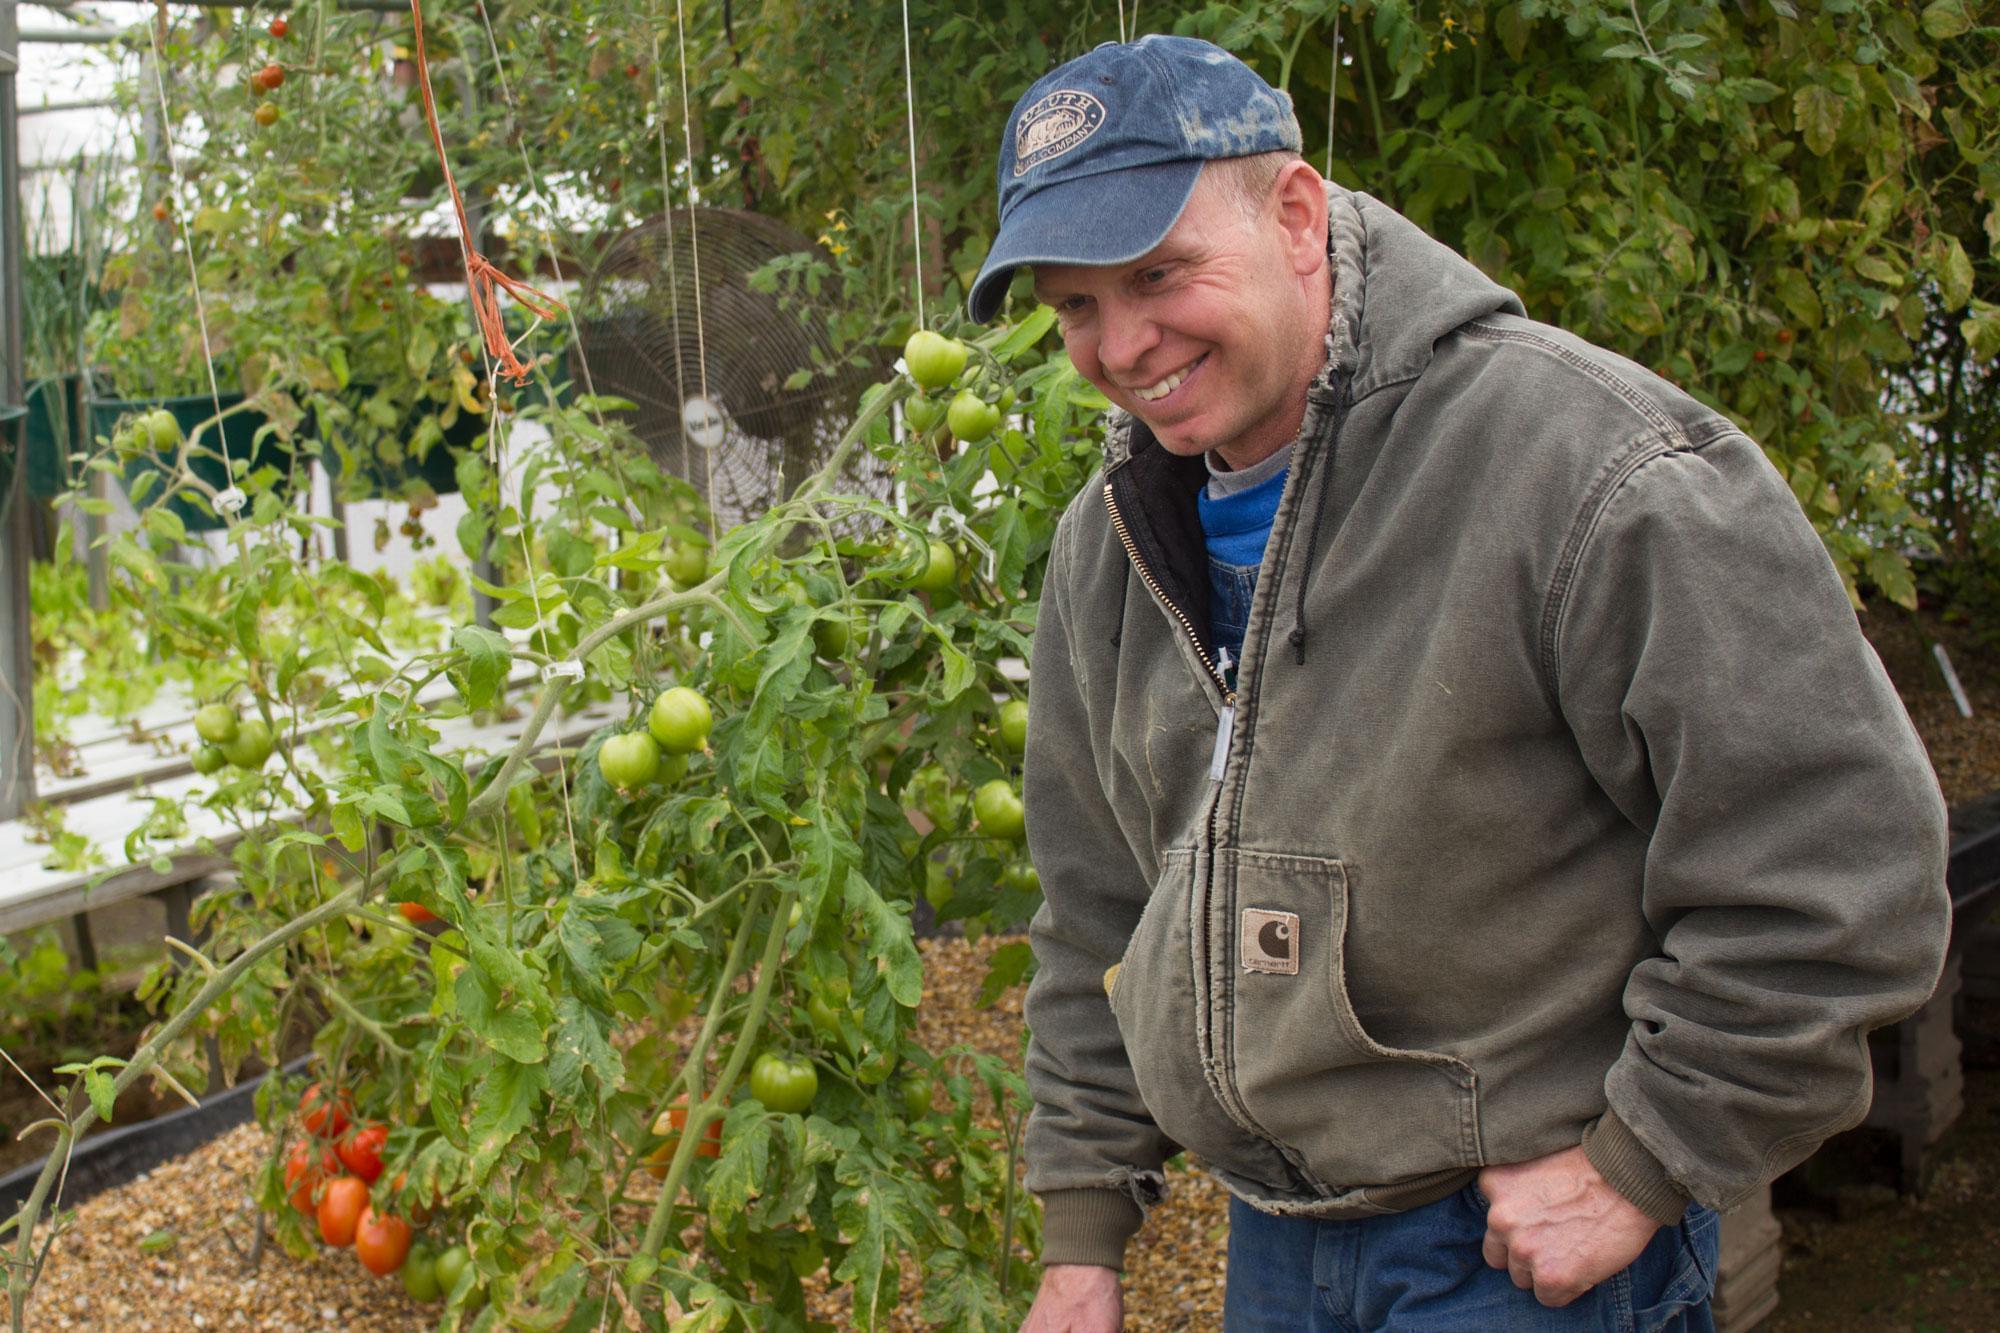 In his aquaponics greenhouse, Iowa farmer Jeff Hafner grows tomatoes, lettuce and other produce year-round, though he has to adjust the varieties as the indoor temperature and humidity change.